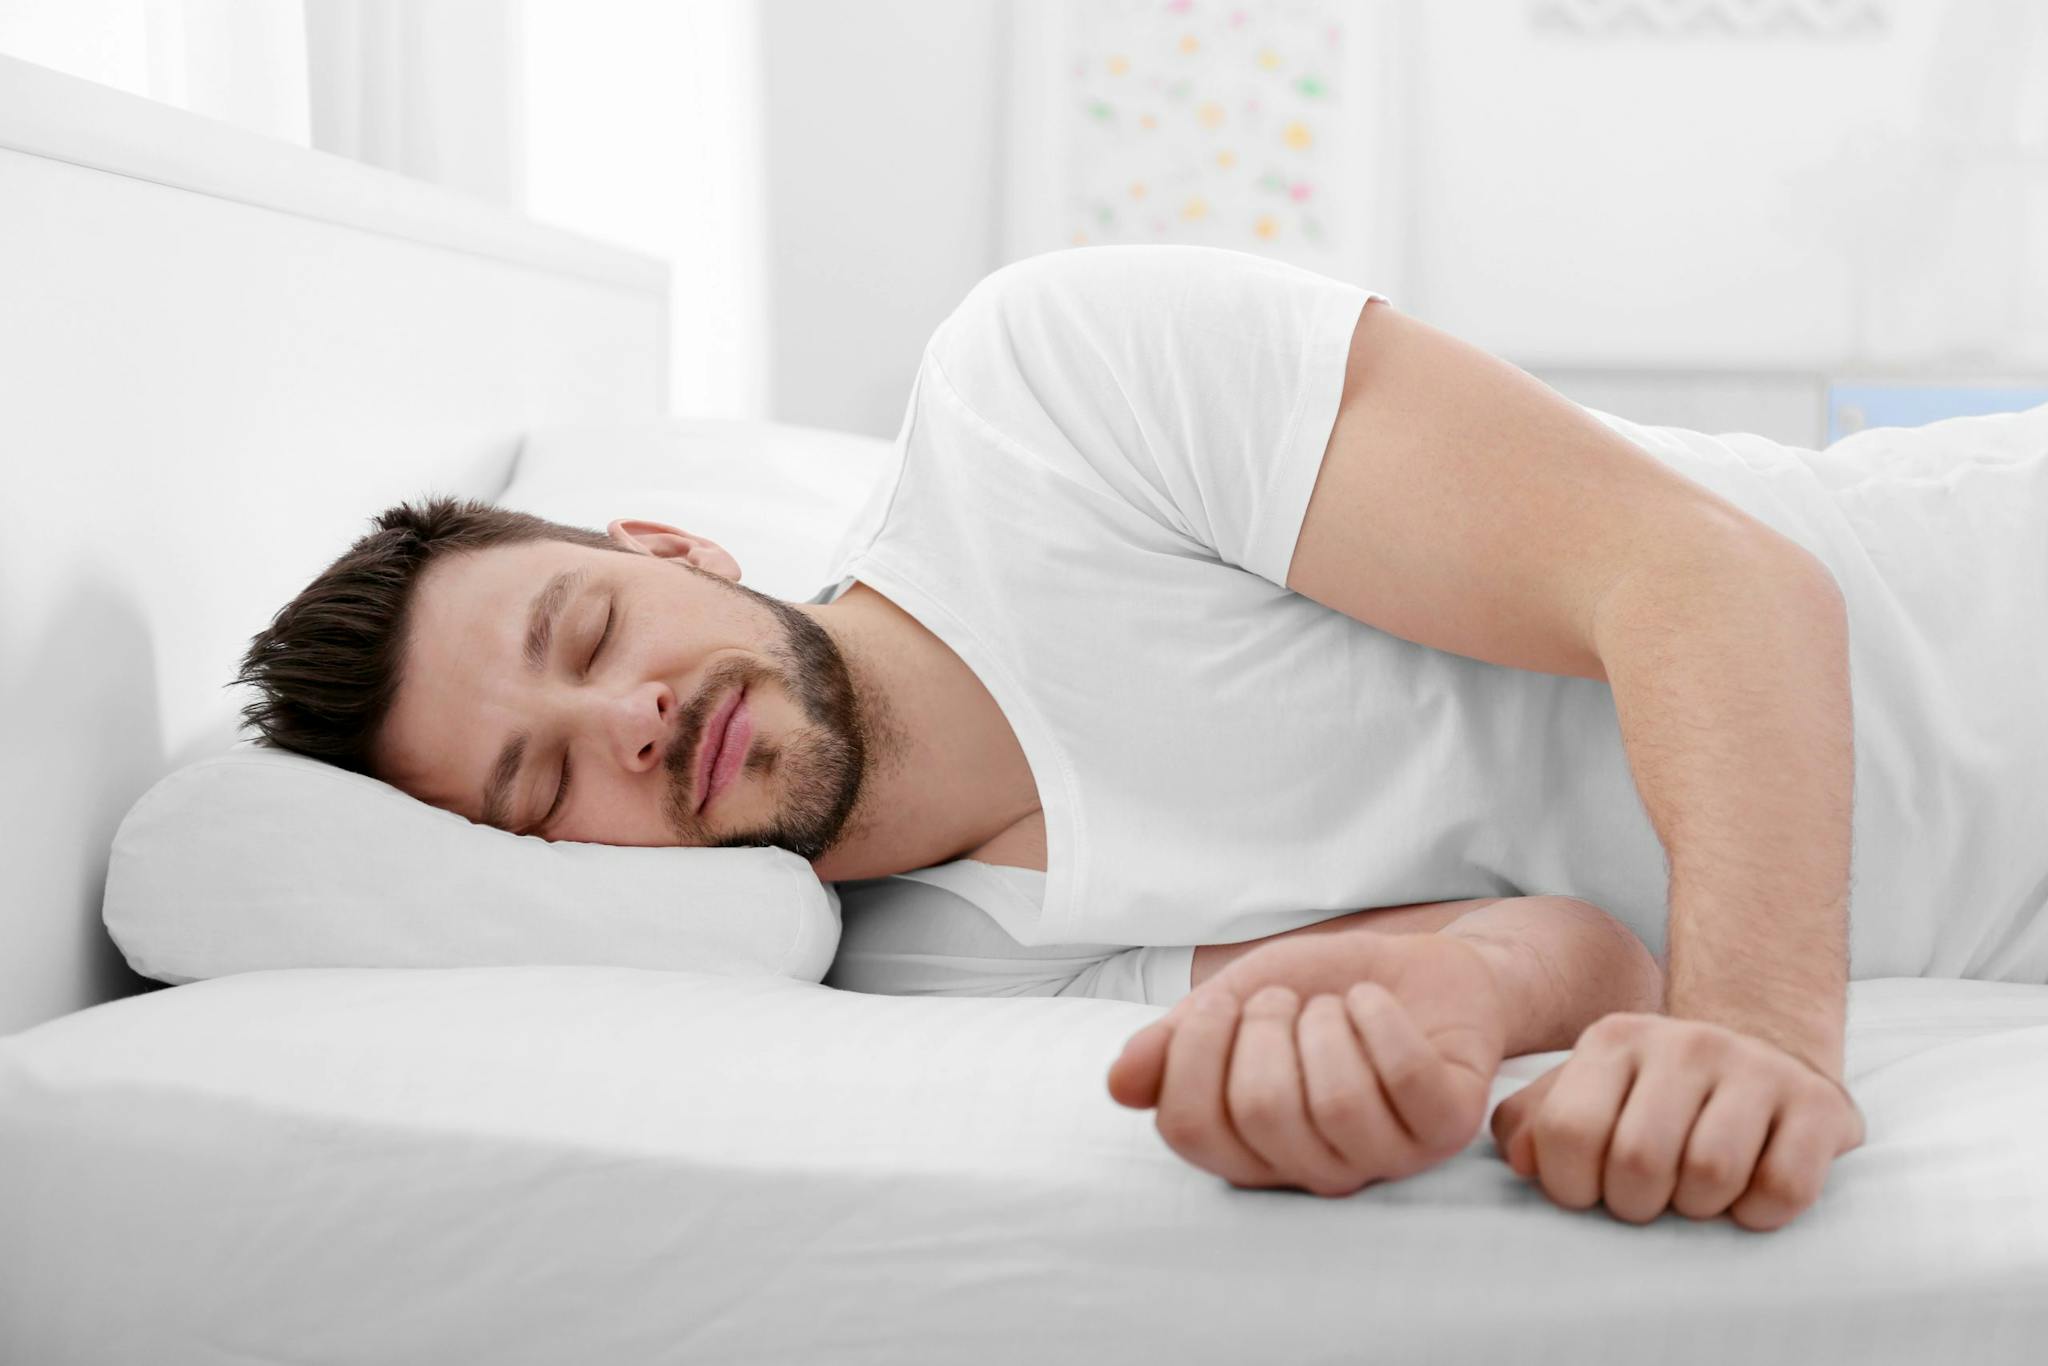 Sleep apnea has been linked to other brain diseases. Learn more today.